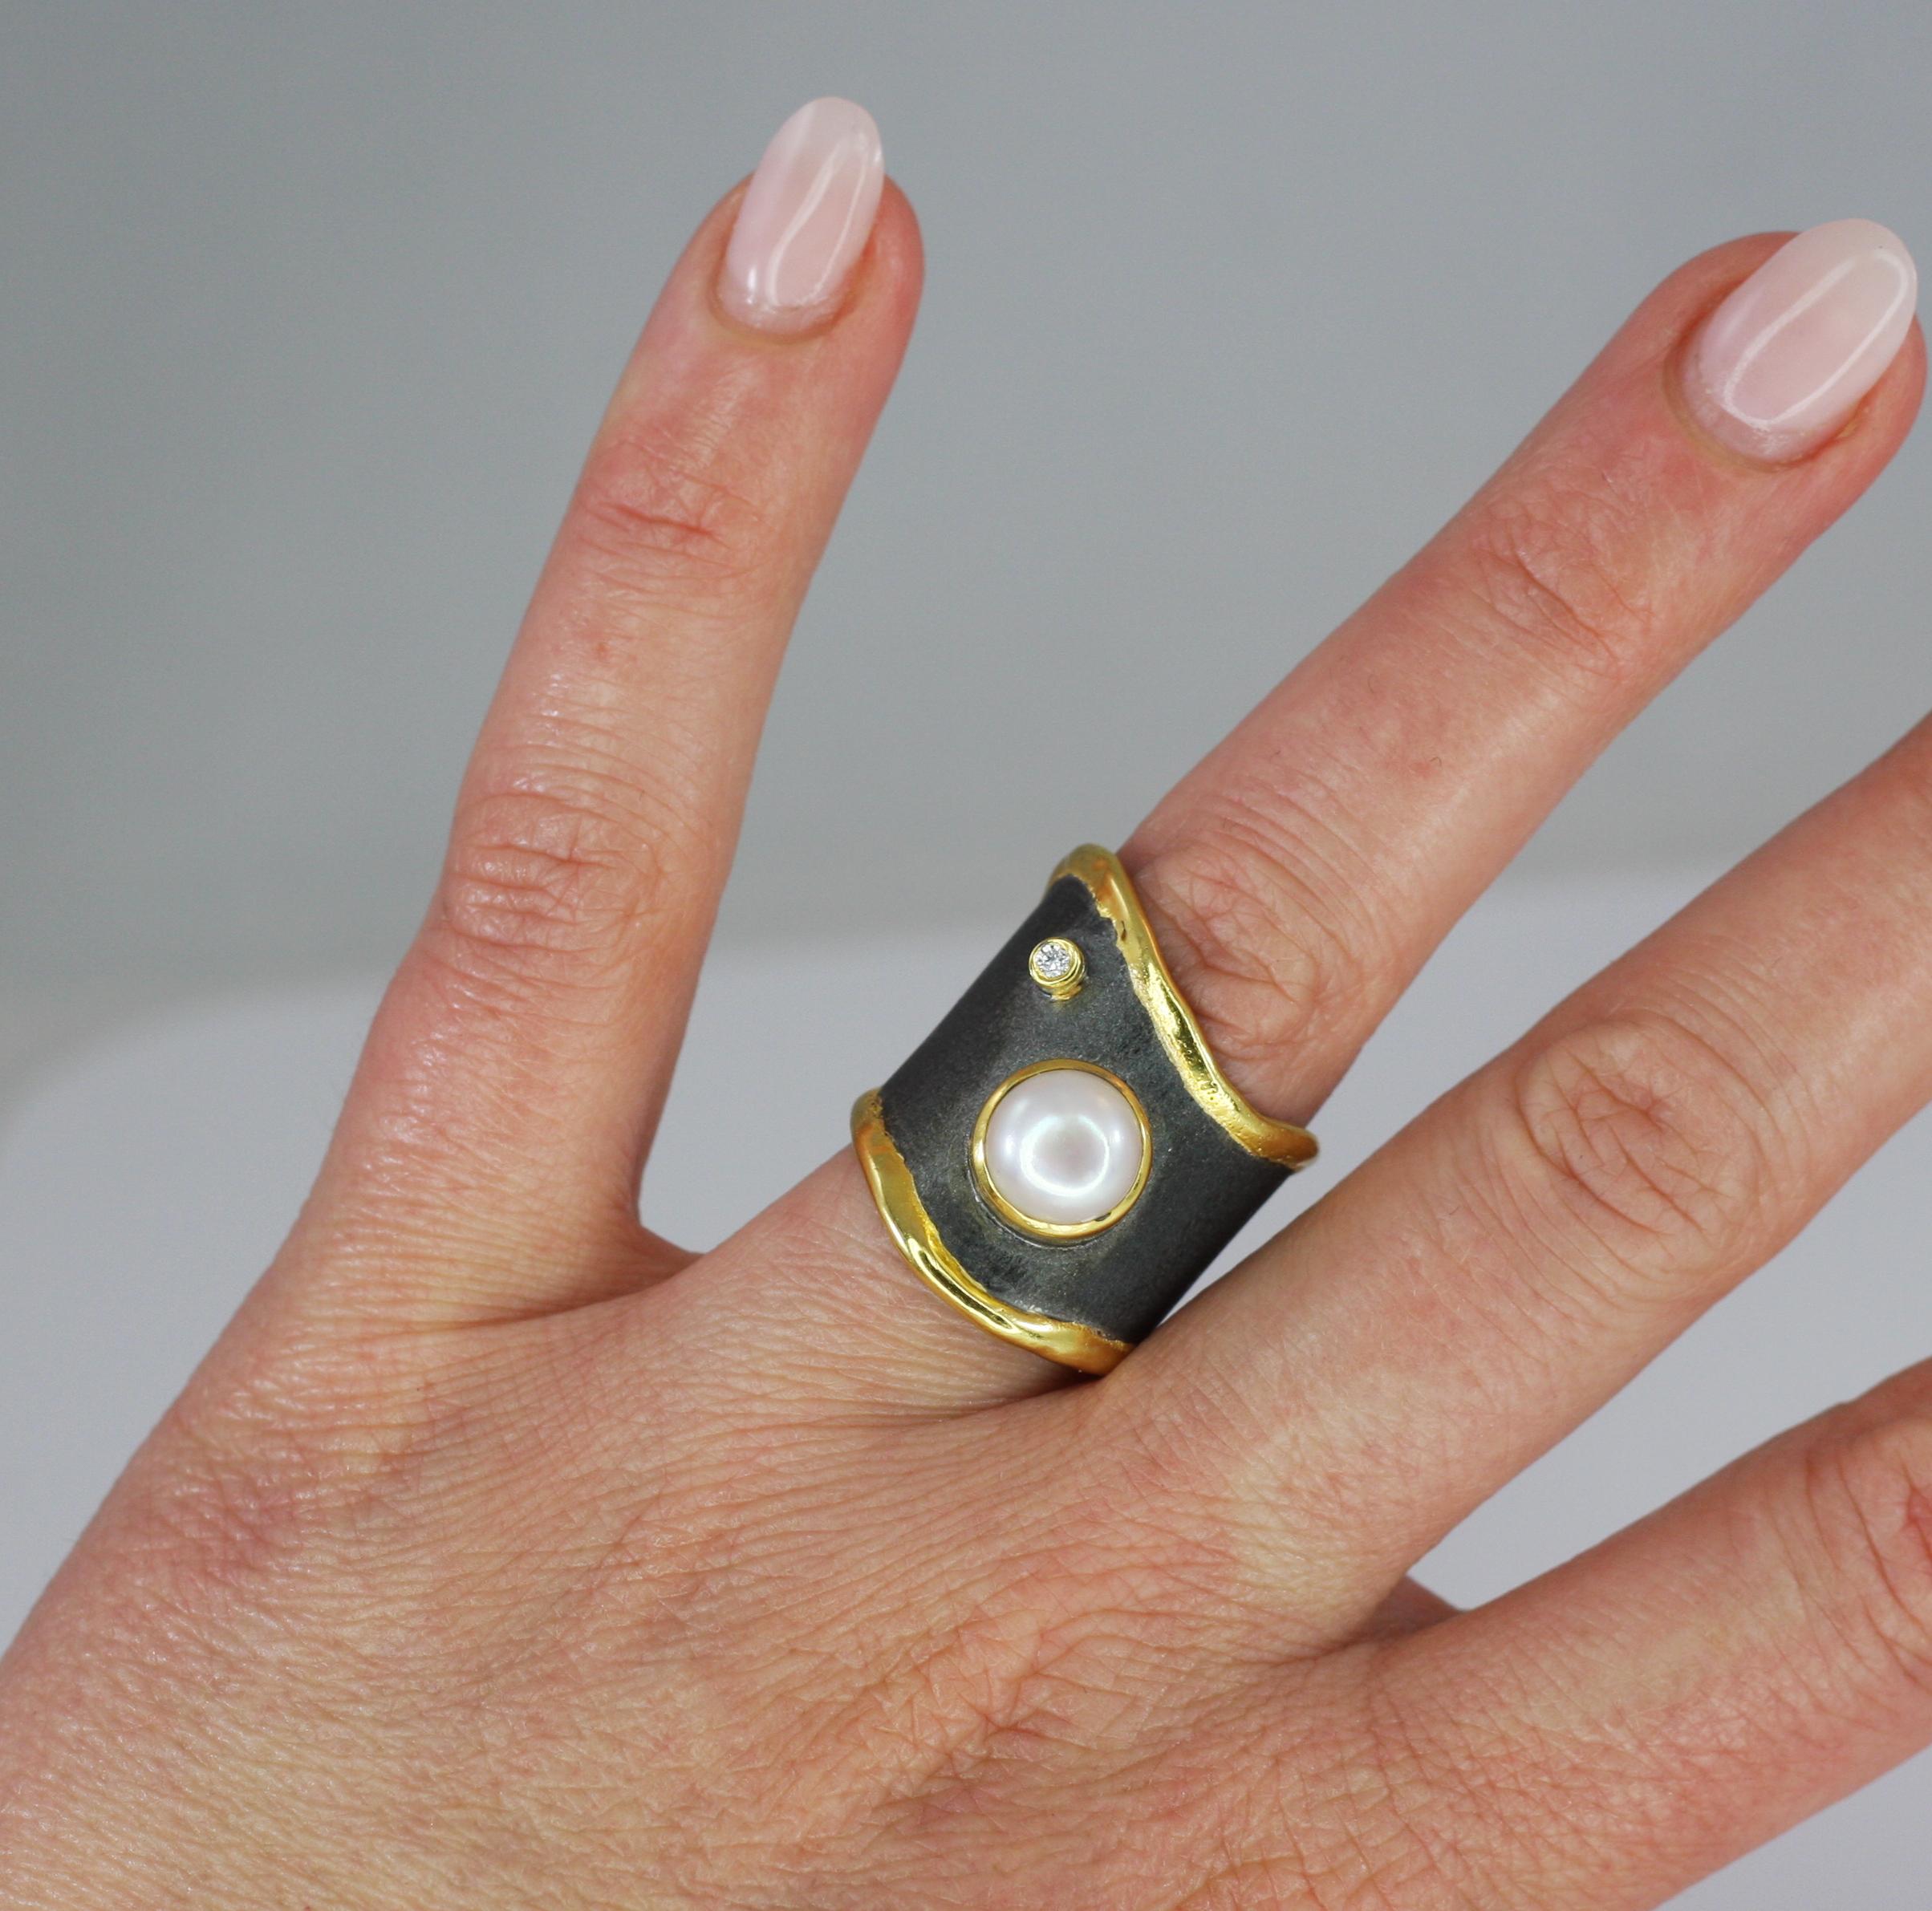 Enjoy artisan unusually shaped Yianni Creations ring from Eclyps Collection. This 100% handmade ring was crafted in Greece from fine silver 950 purity and plated with black rhodium. The edges are decorated with thick 24 Karat Yellow Gold overlay.